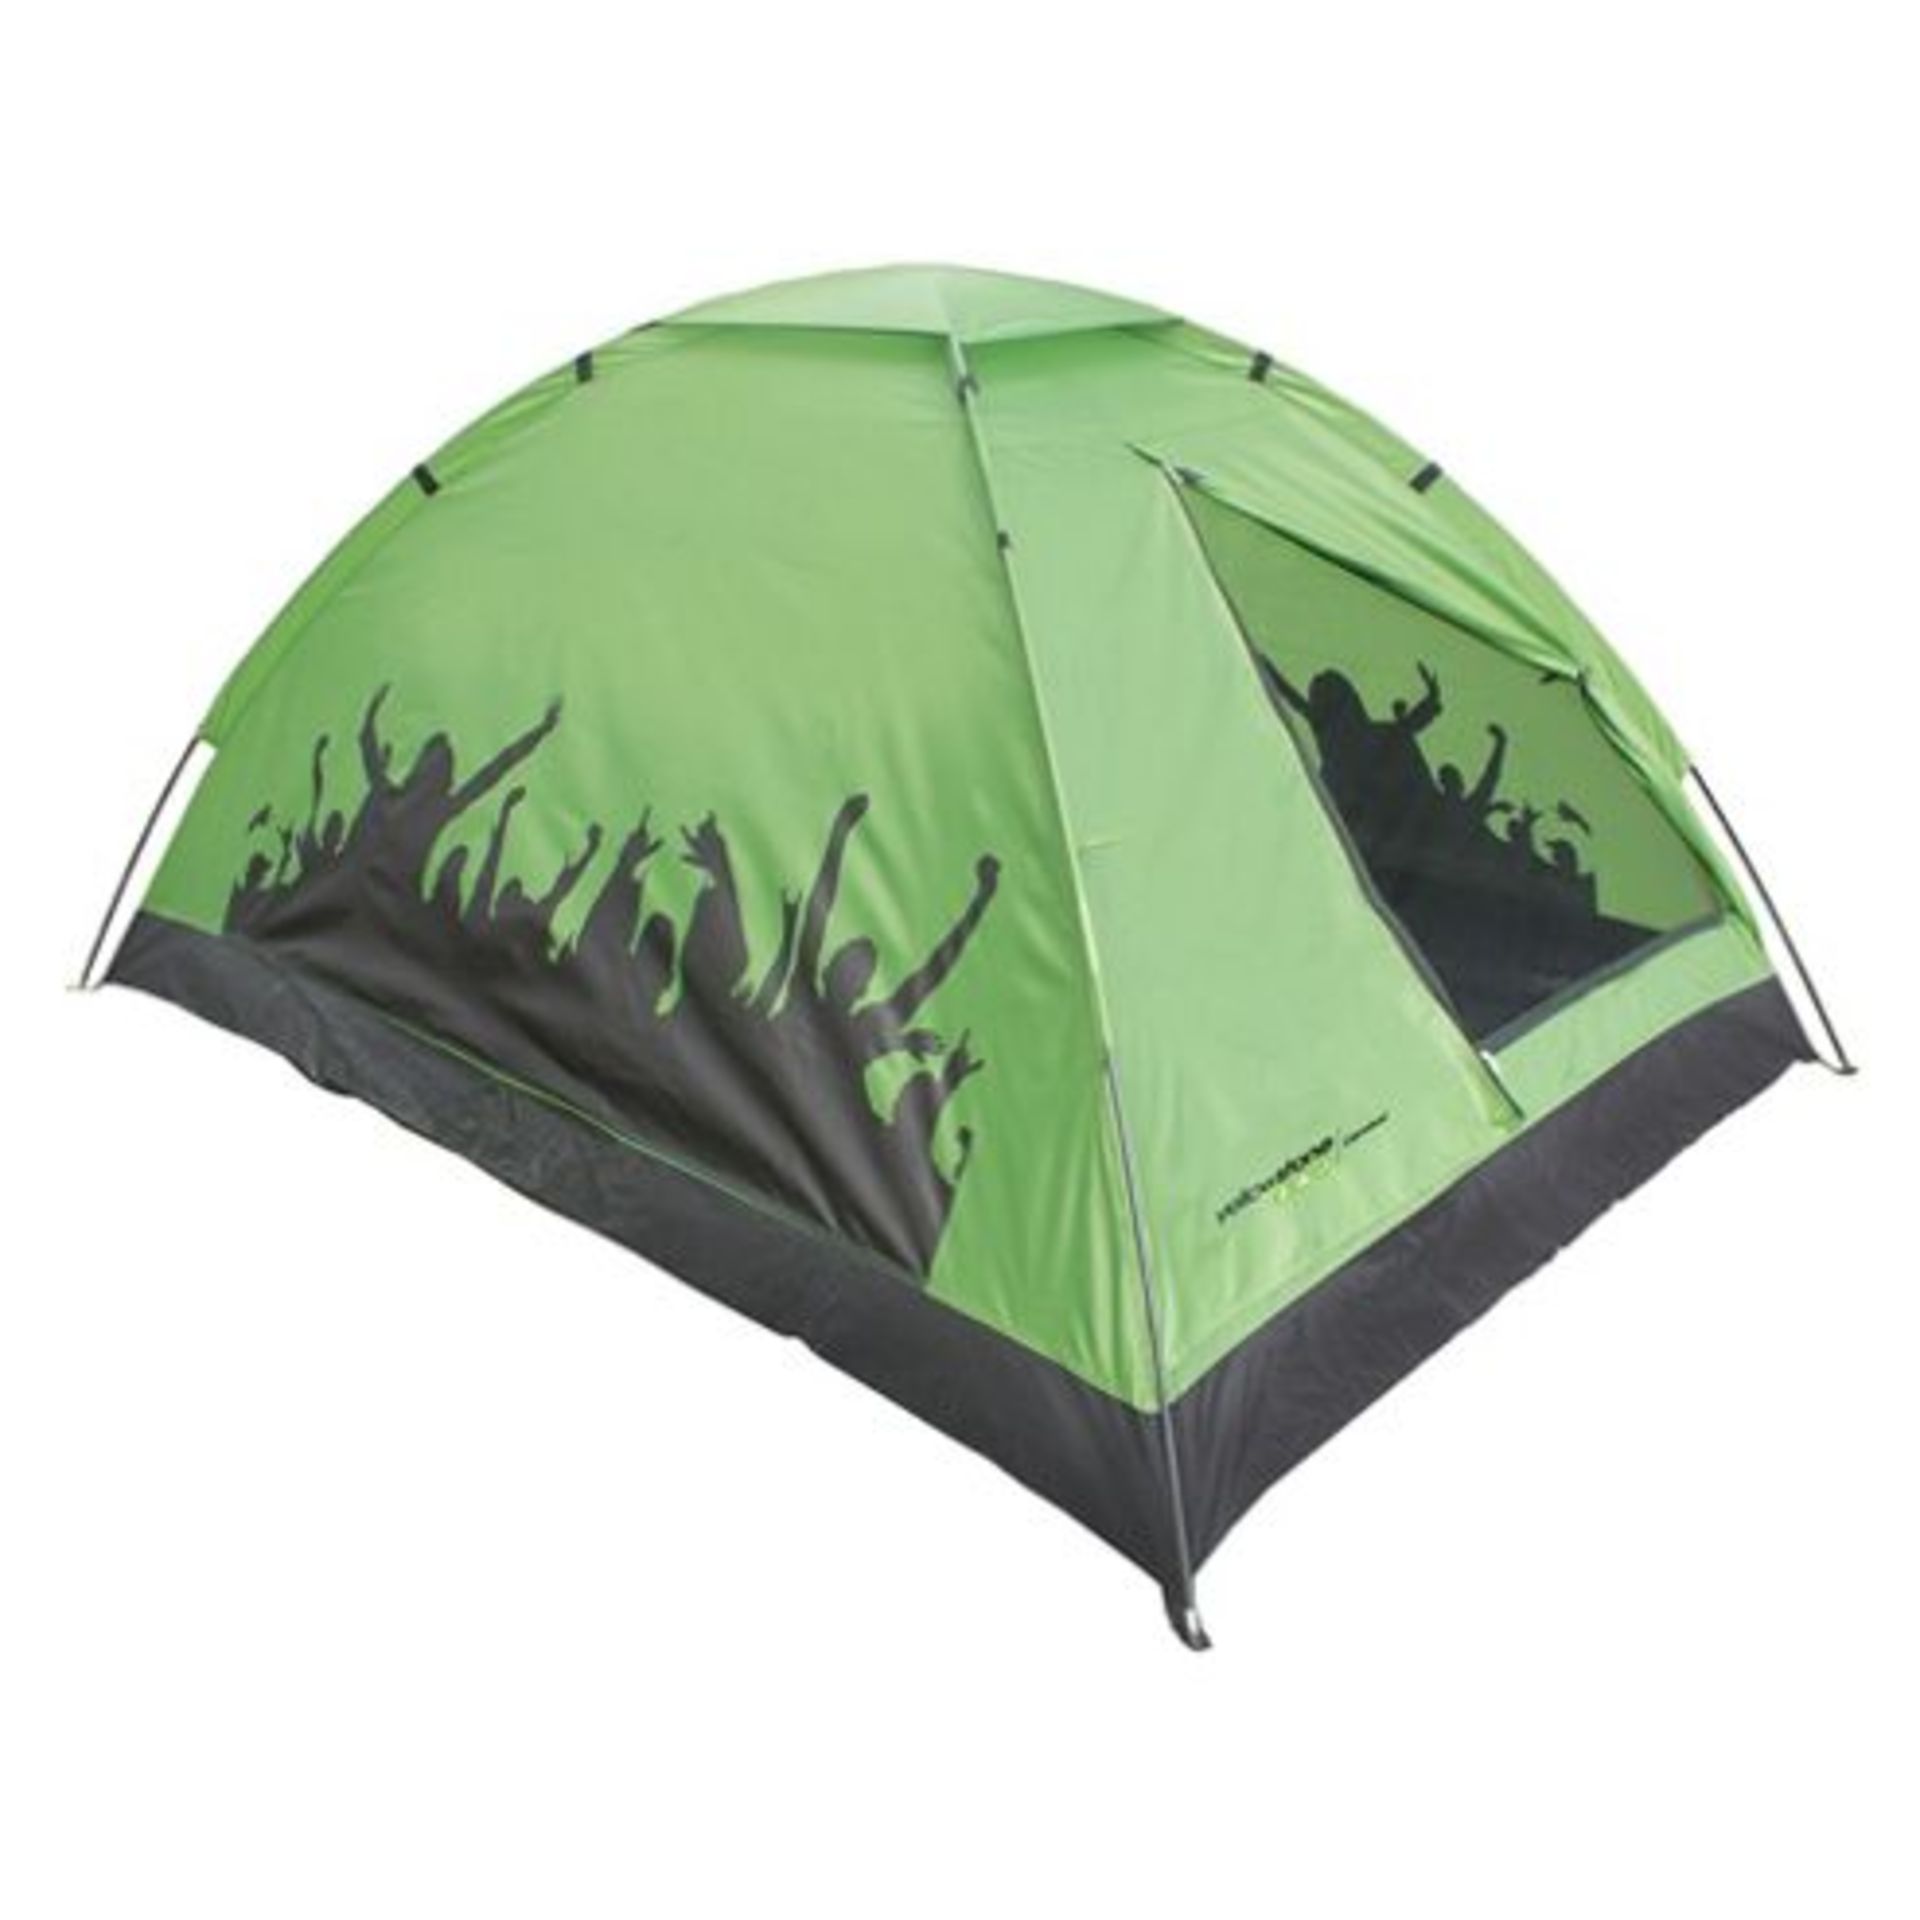 V *TRADE QTY* Brand New Two Person Silhouette Dome Tent X 6 YOUR BID PRICE TO BE MULTIPLIED BY SIX